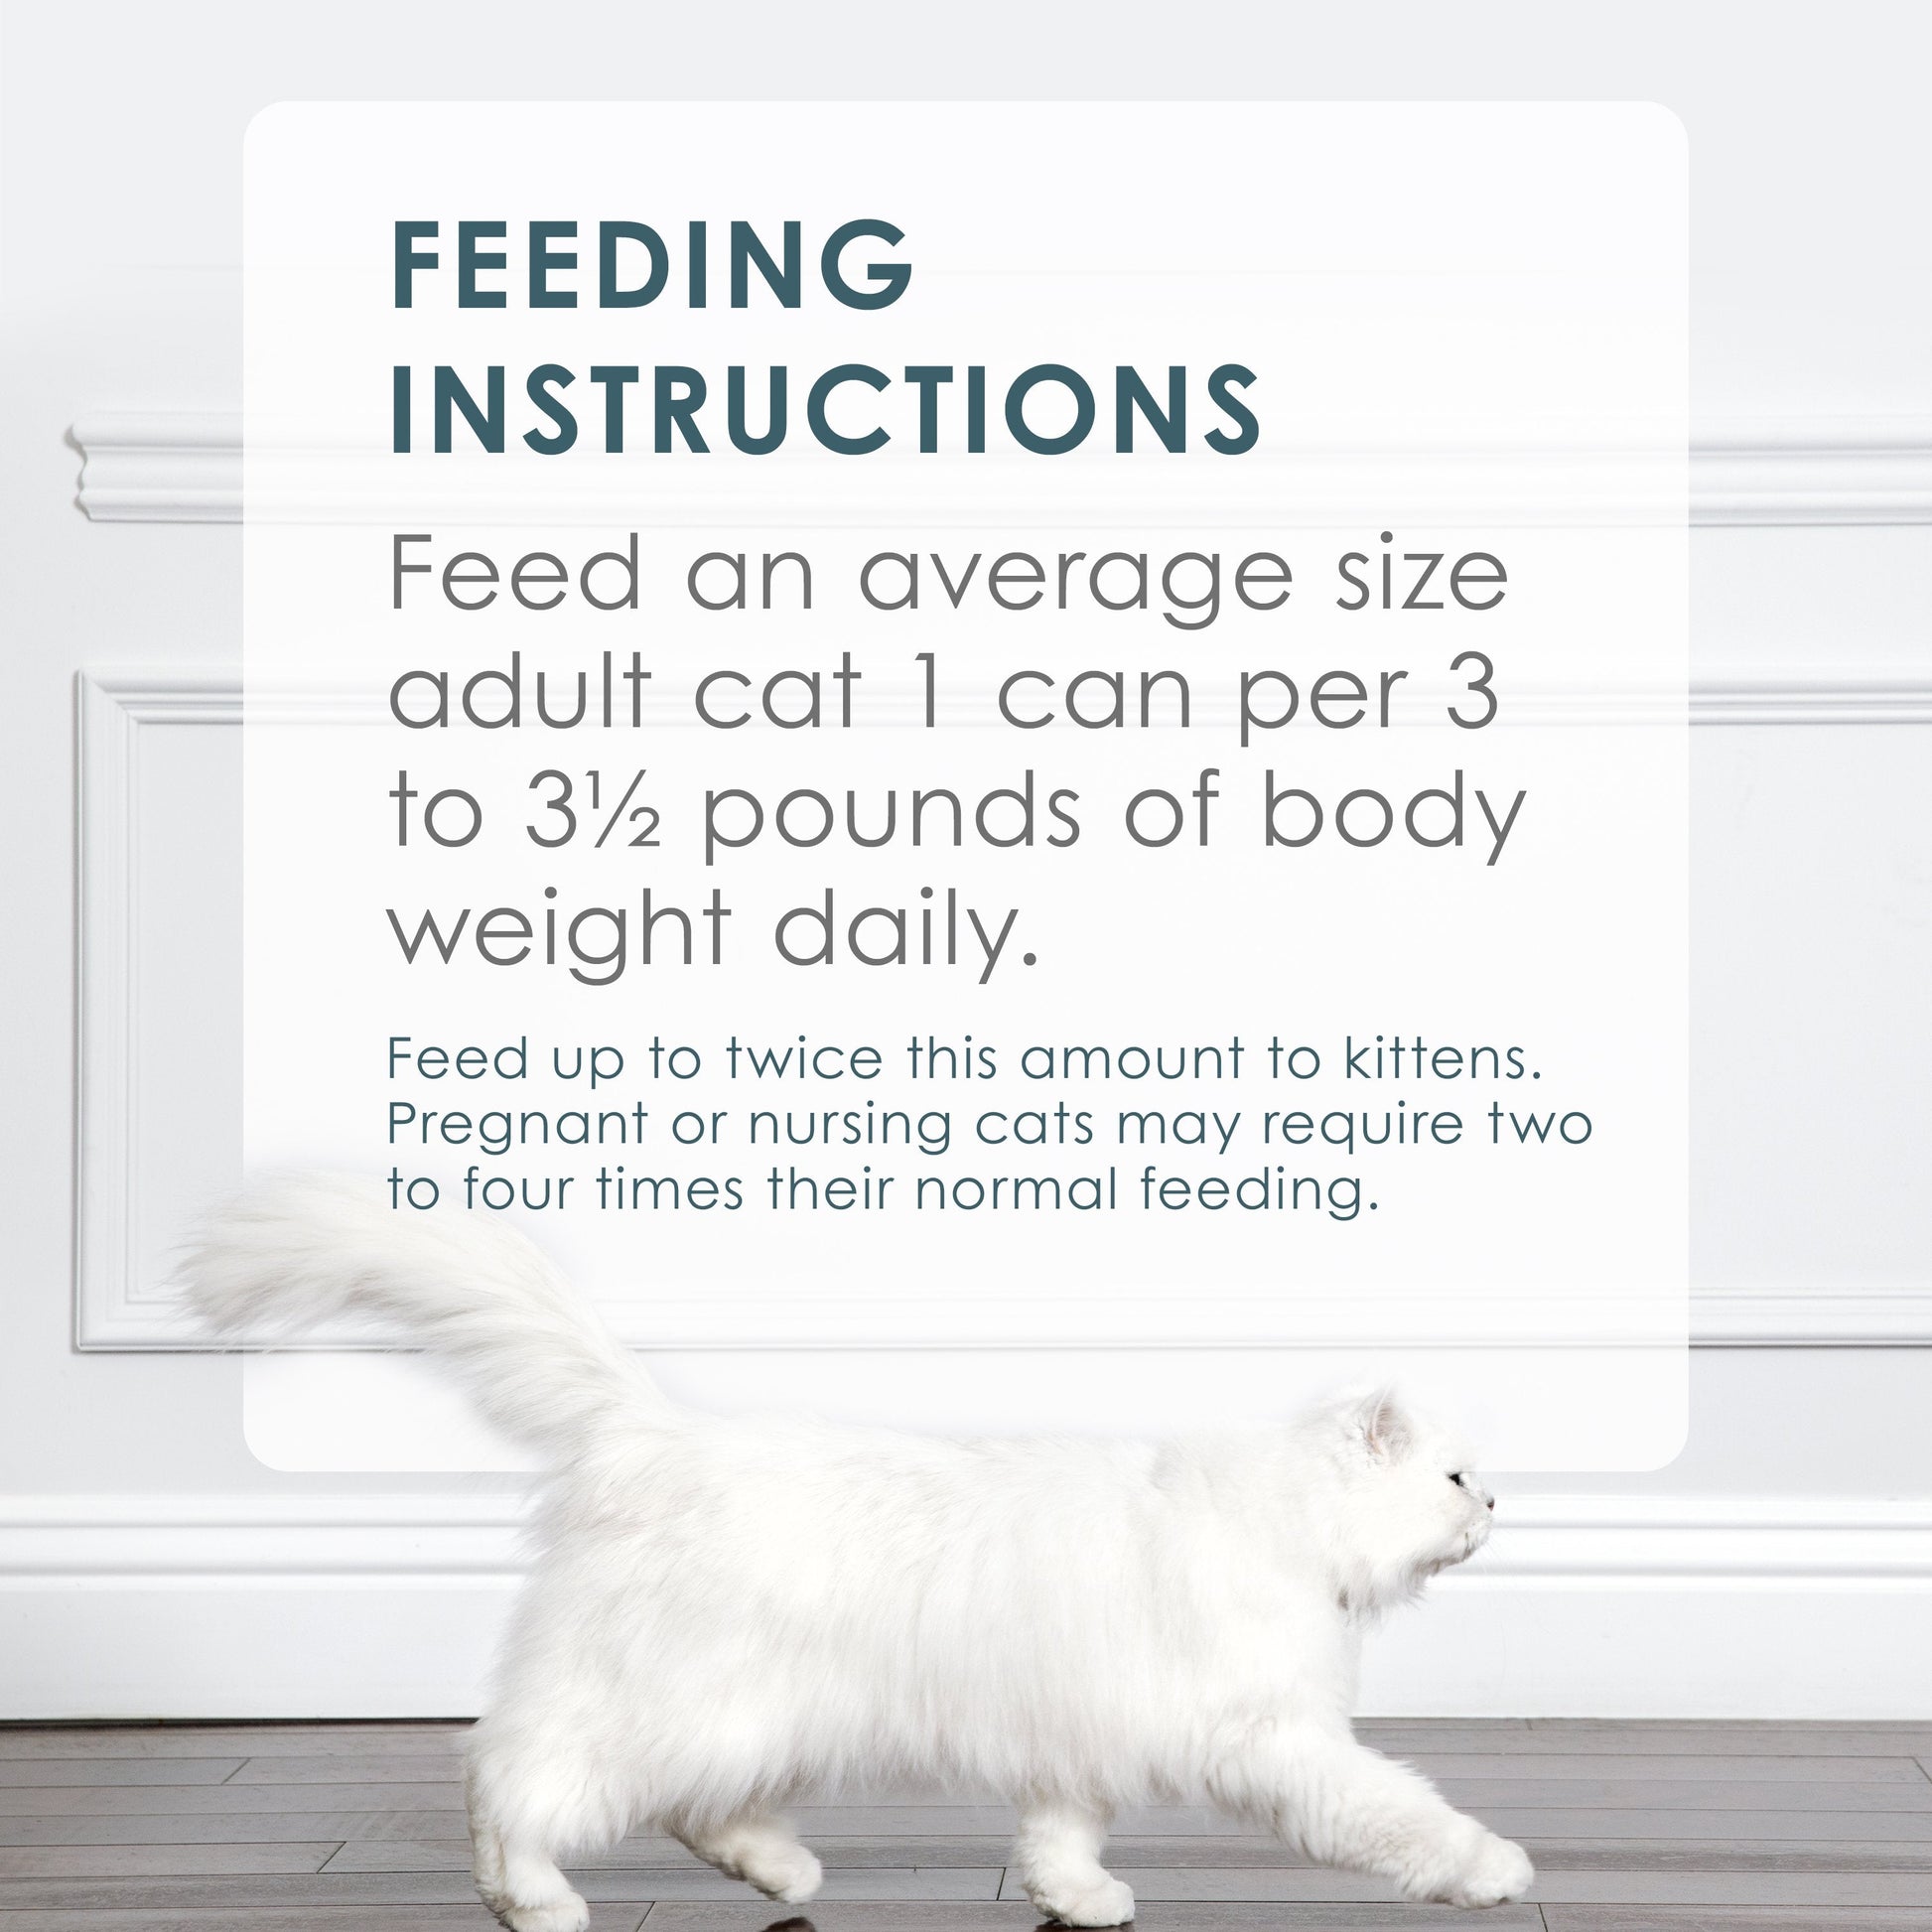 Feeding Instructions. Feed an average size adult cat 1 can per 3 to 3.5 pounds of body weight daily. Feed twice this amount to kittens. Pregnant or nursing cats may require two to four times their normal feeding.